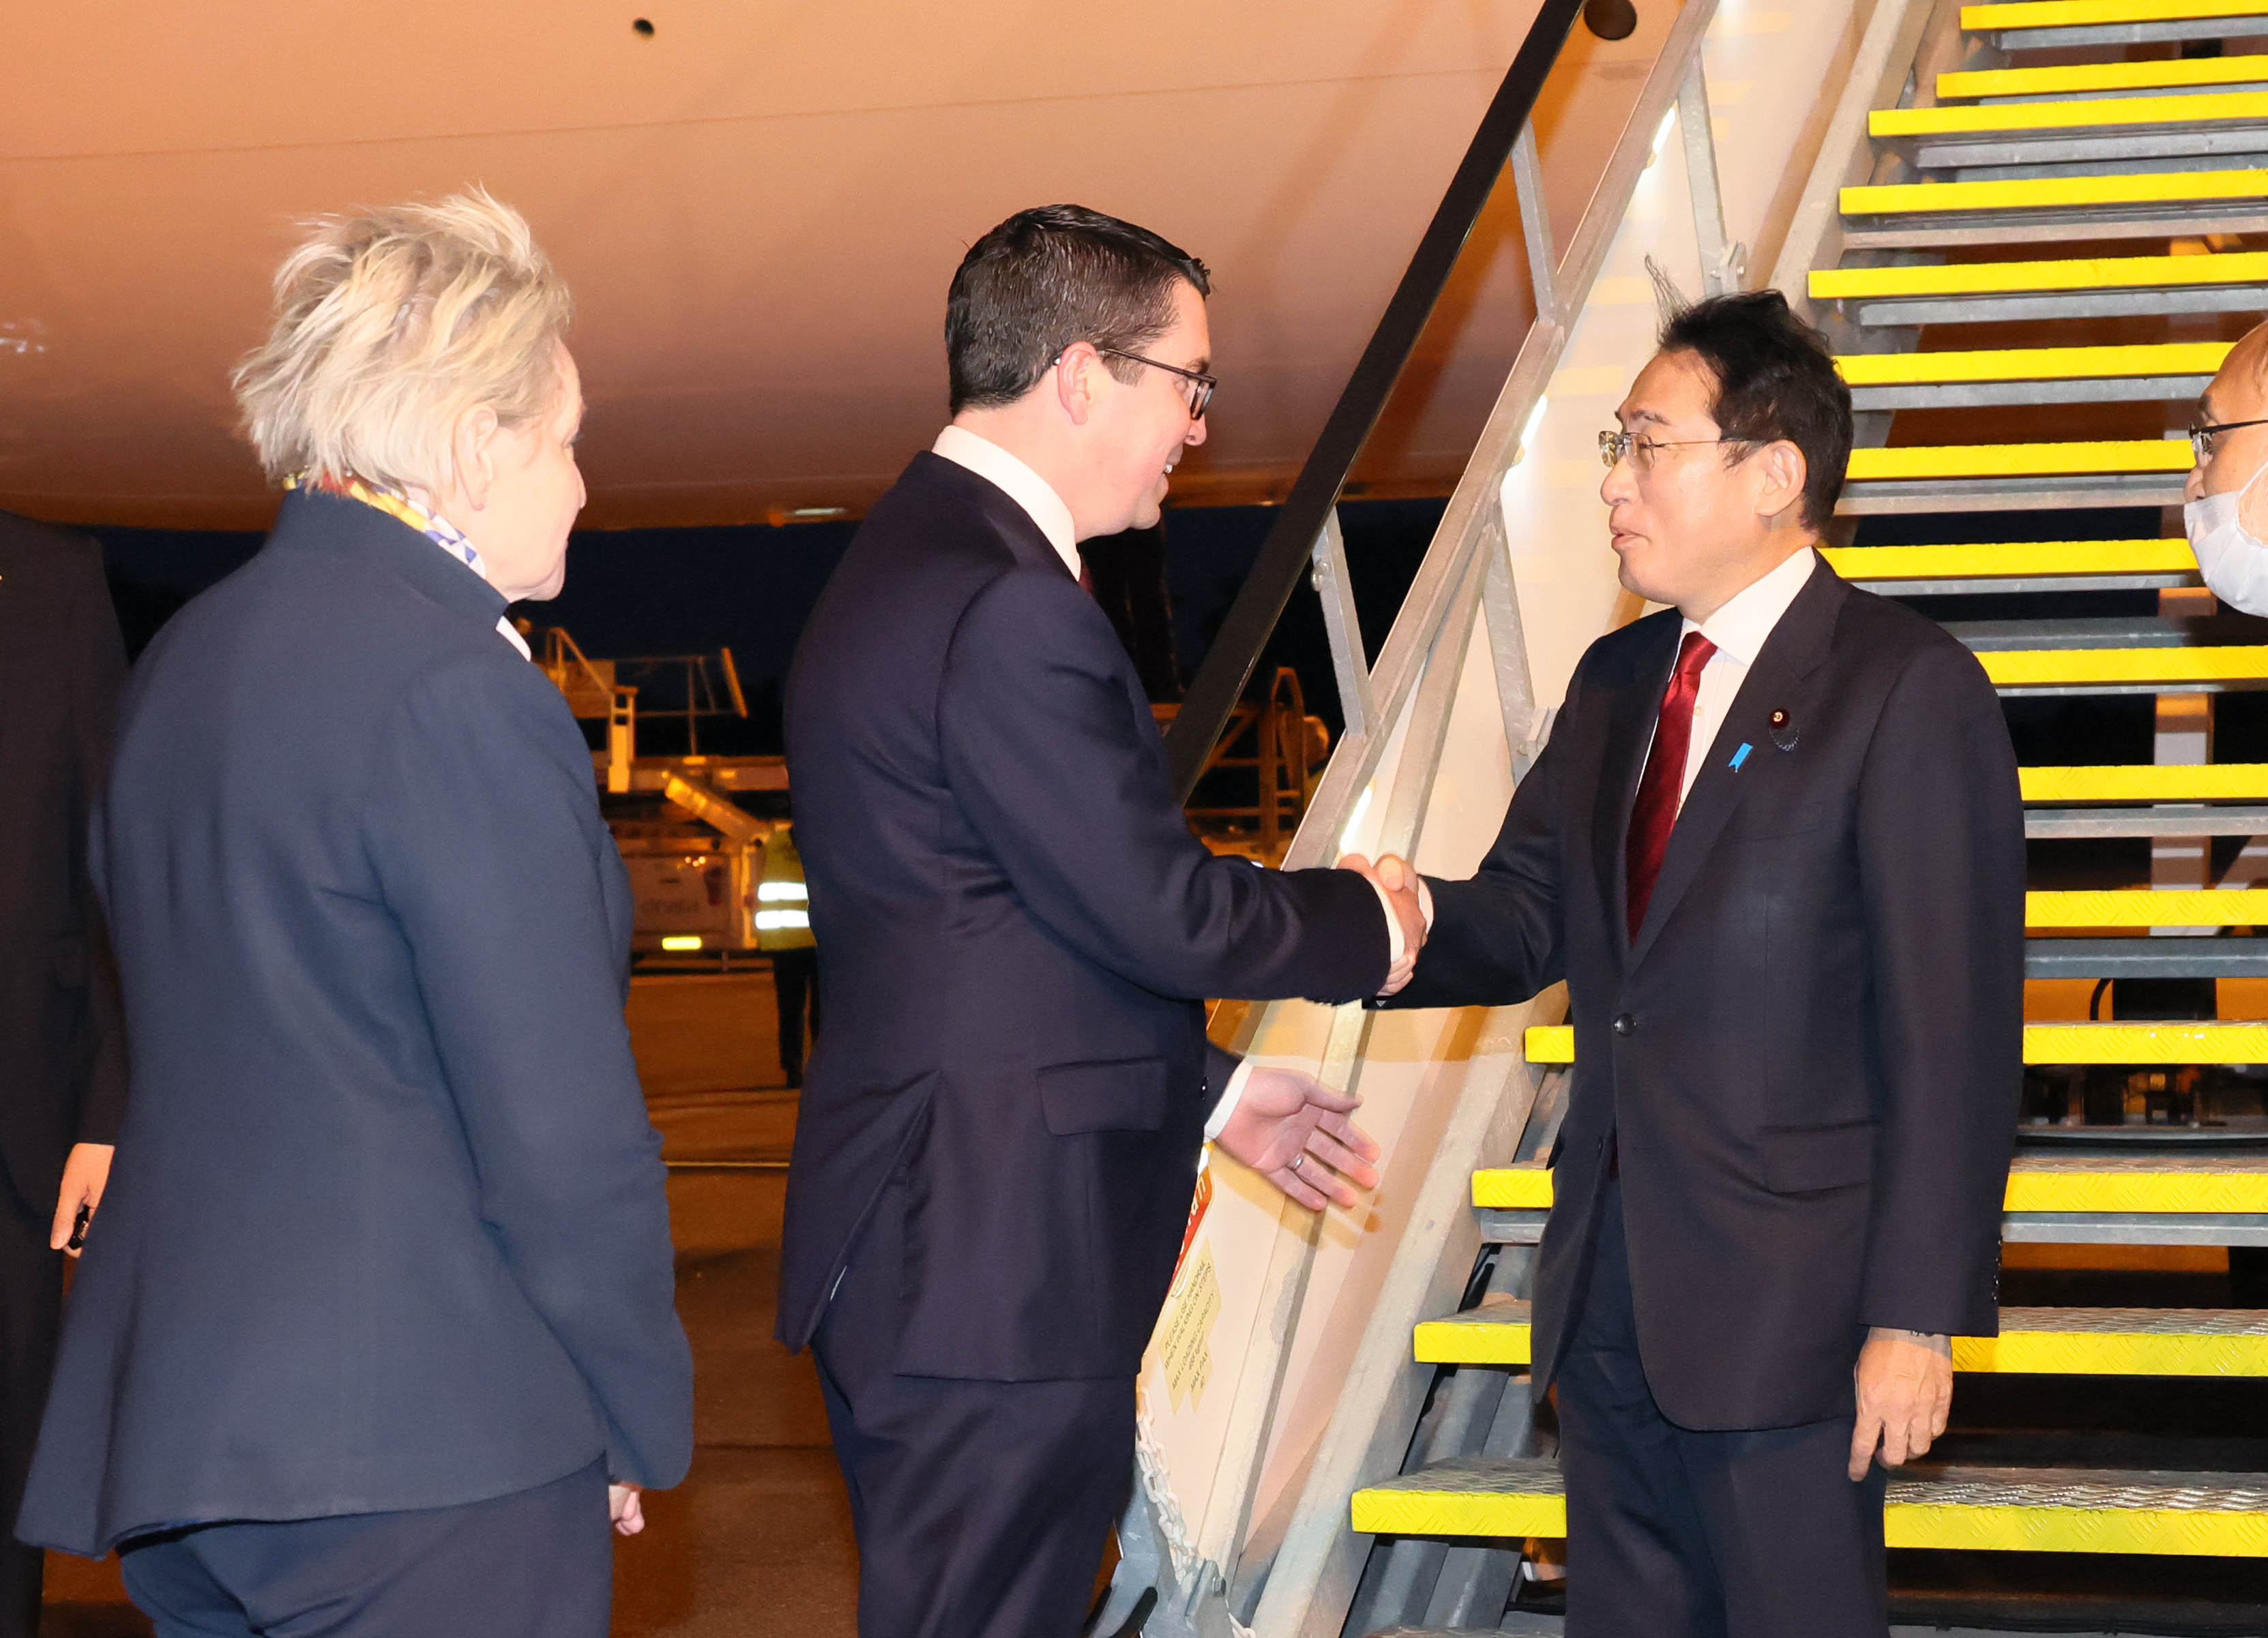 Photograph of the Prime MInister arriving in Australia (2)